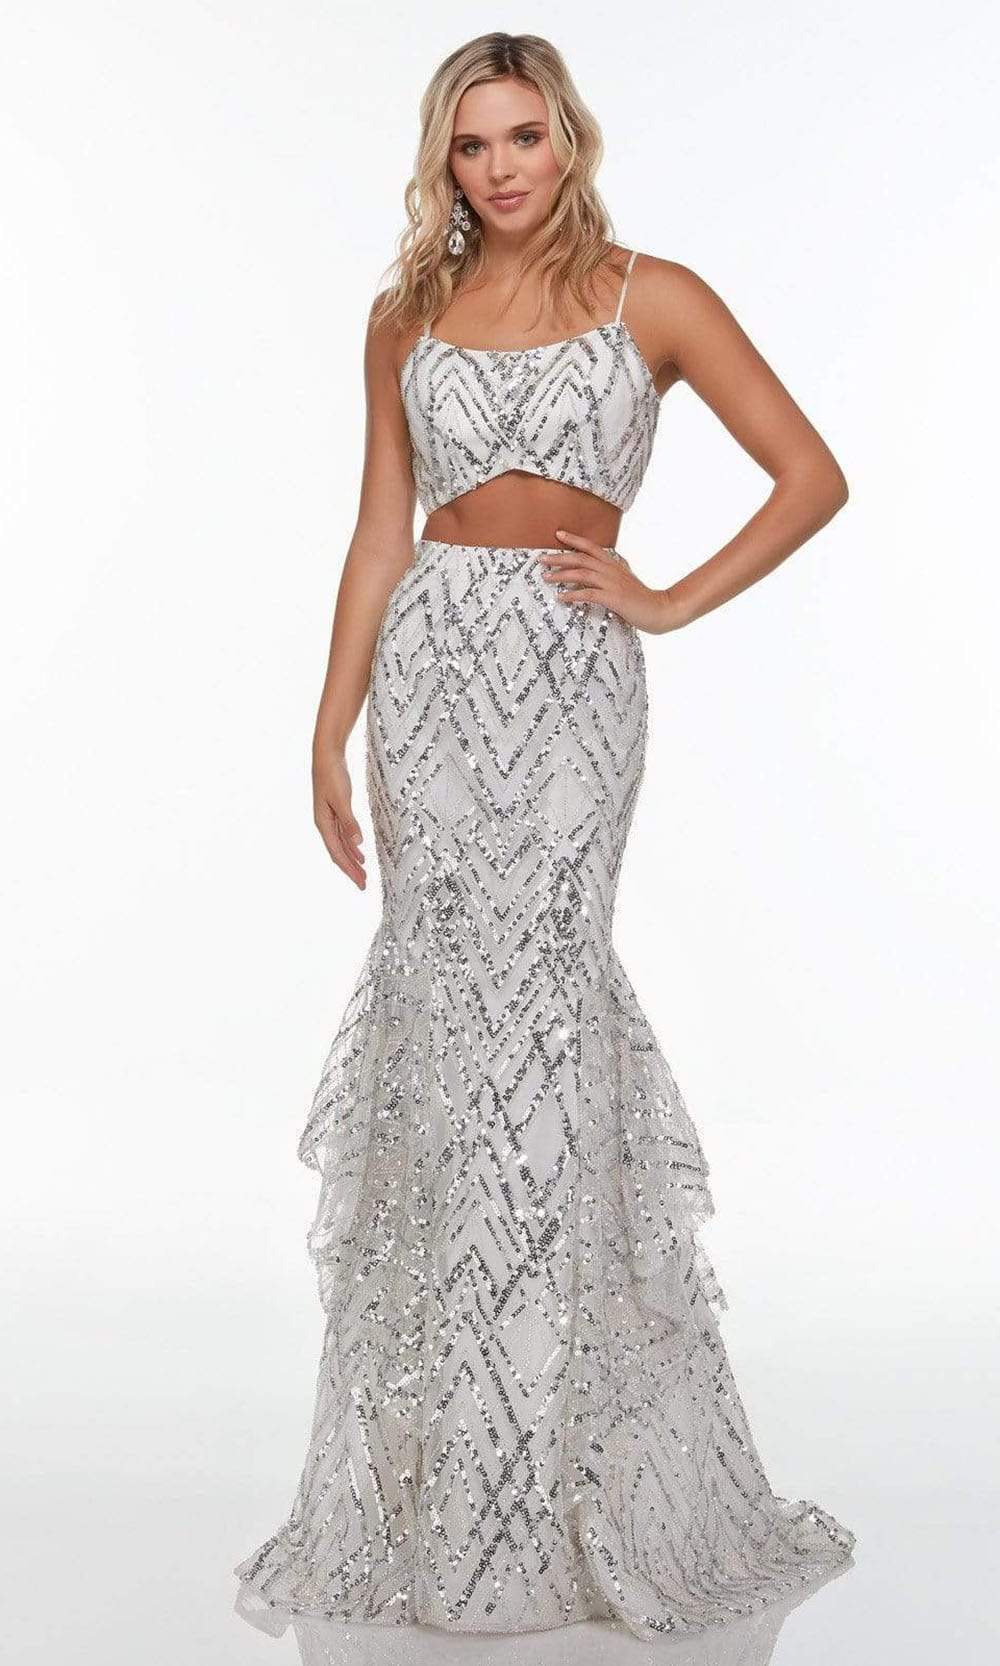 Alyce Paris - 61212 Two Piece Strappy Sequined Gown Prom Dresses 000 / Silver/White